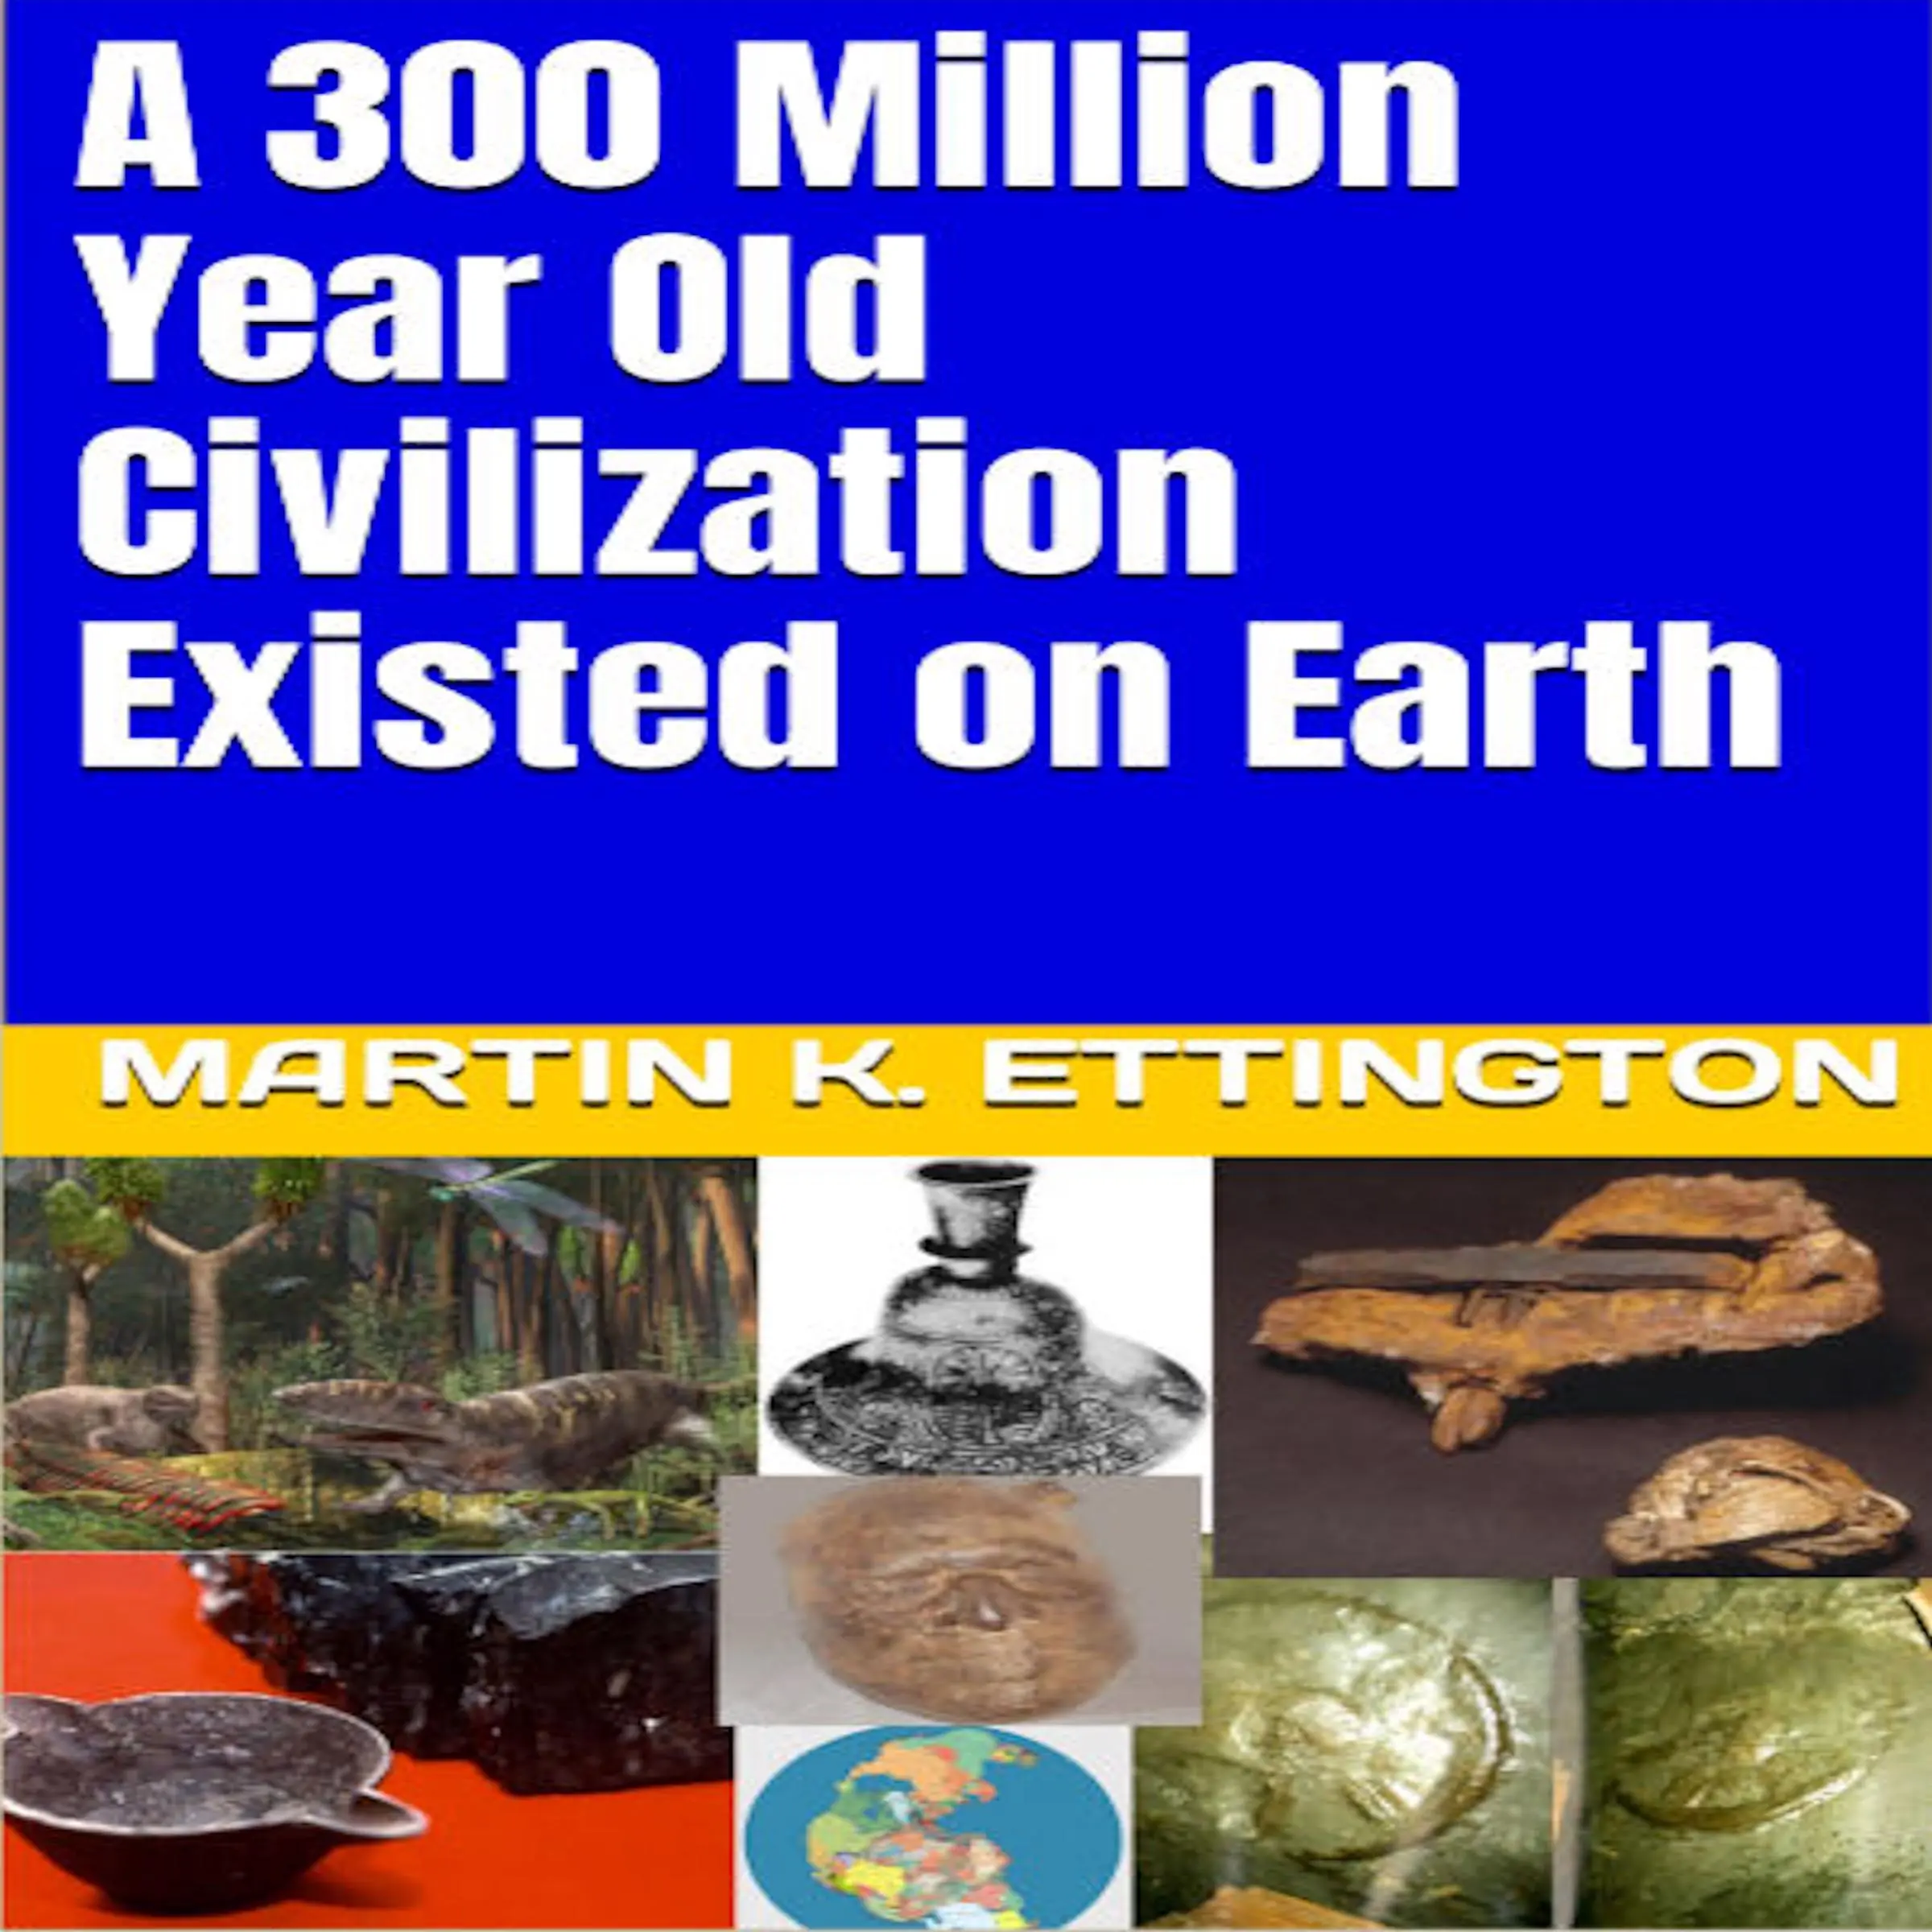 A 300 Million Year Old Civilization Existed on Earth by Martin K. Ettington Audiobook